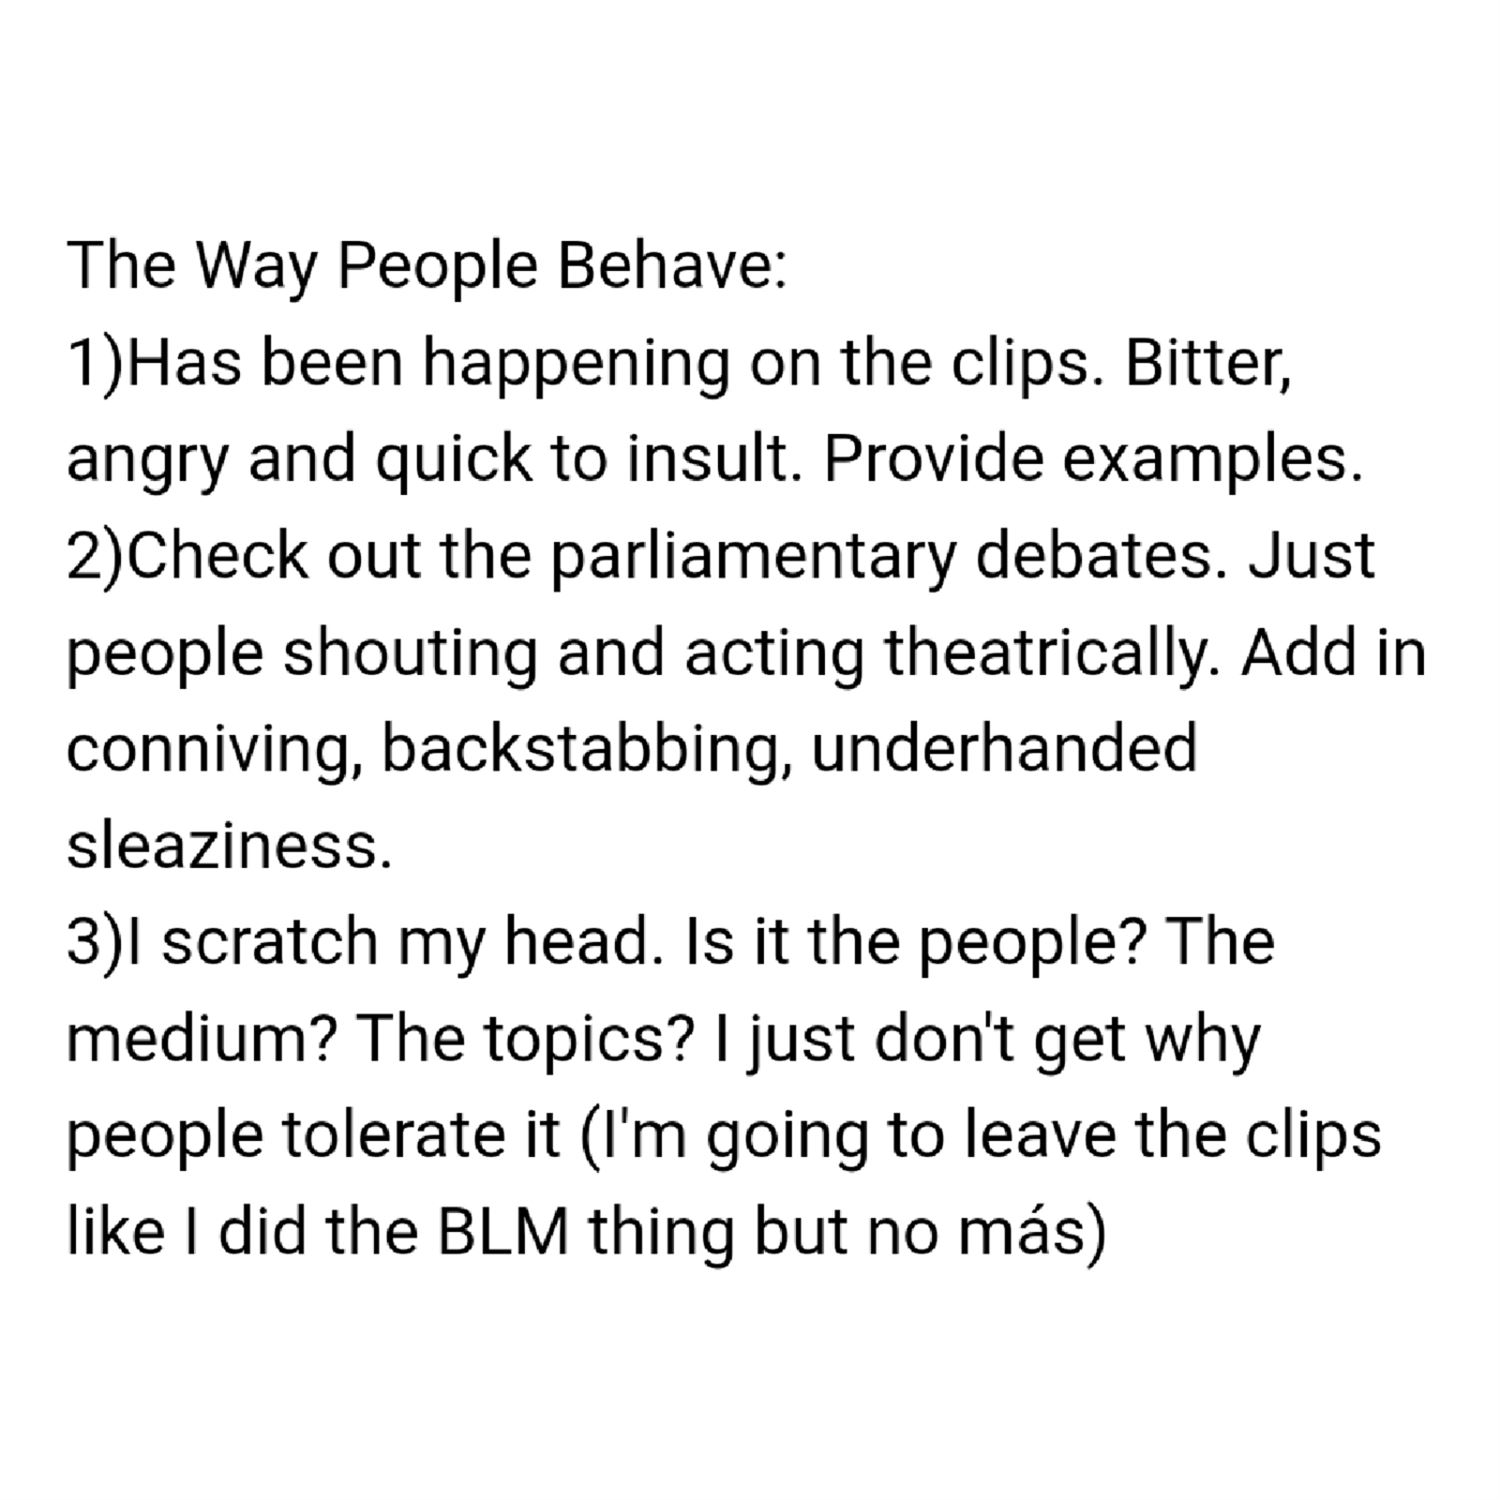 The way people behave